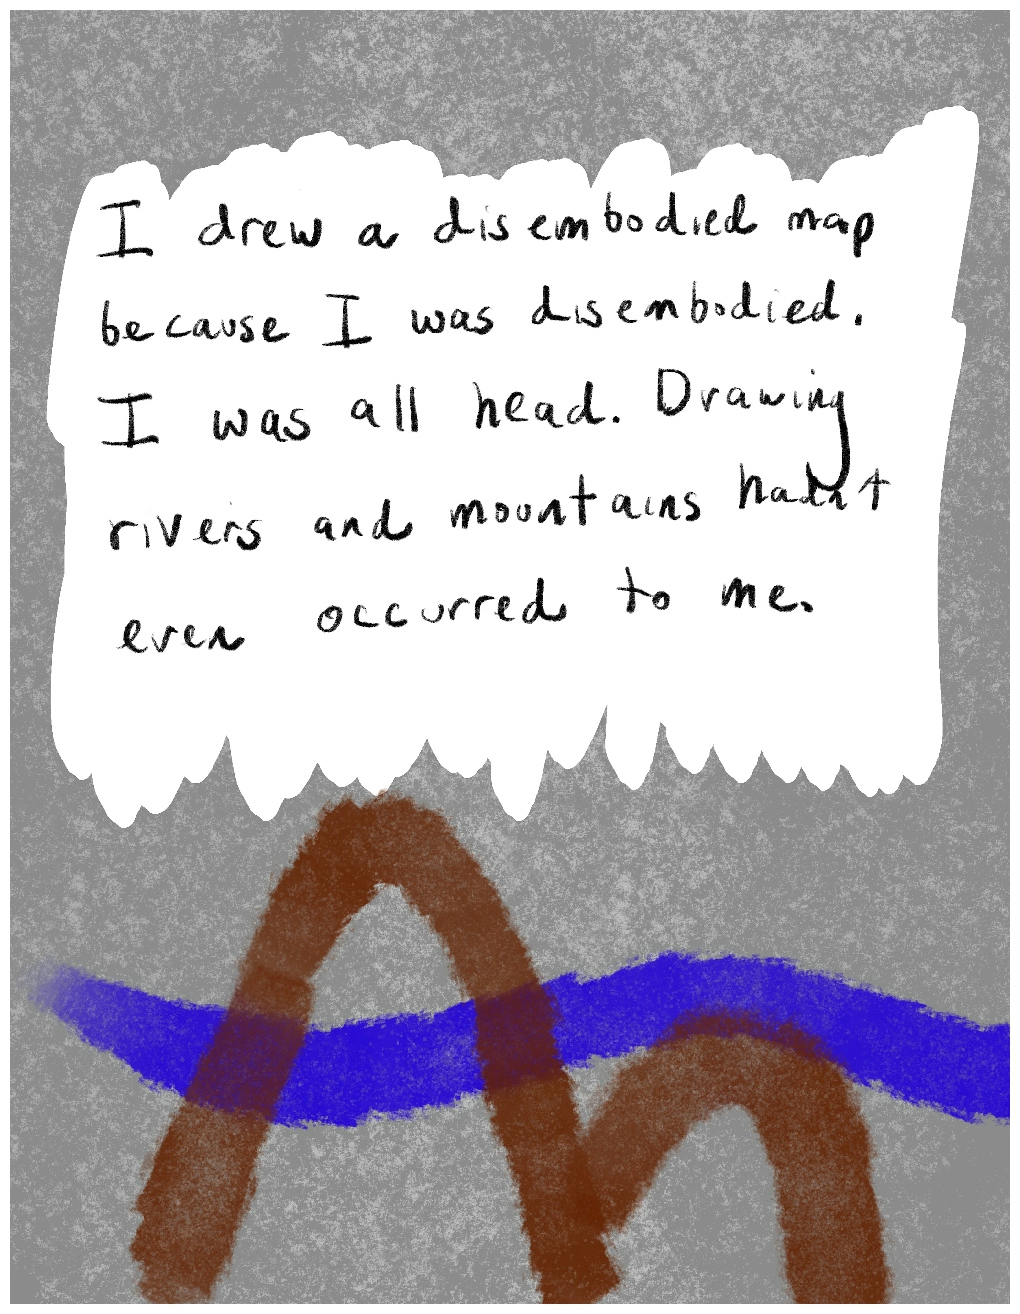 Panel 3 of a four-panel comic called "Disembodied and alone'', consisting of thick colour lines and text on a mottled grey background. In the bottom third of the panel are two wavy lines. A very thick blue wavy line snakes across the panel from left to right, and a very thick brown line consisting of two humps cuts across the top of the blue line. A block of hand-written text against a white background fills the top two thirds of the panel. The text says "I drew a disembodied map because I was disembodied. I was all head. Drawing rivers and mountains hadn't even occurred to me."